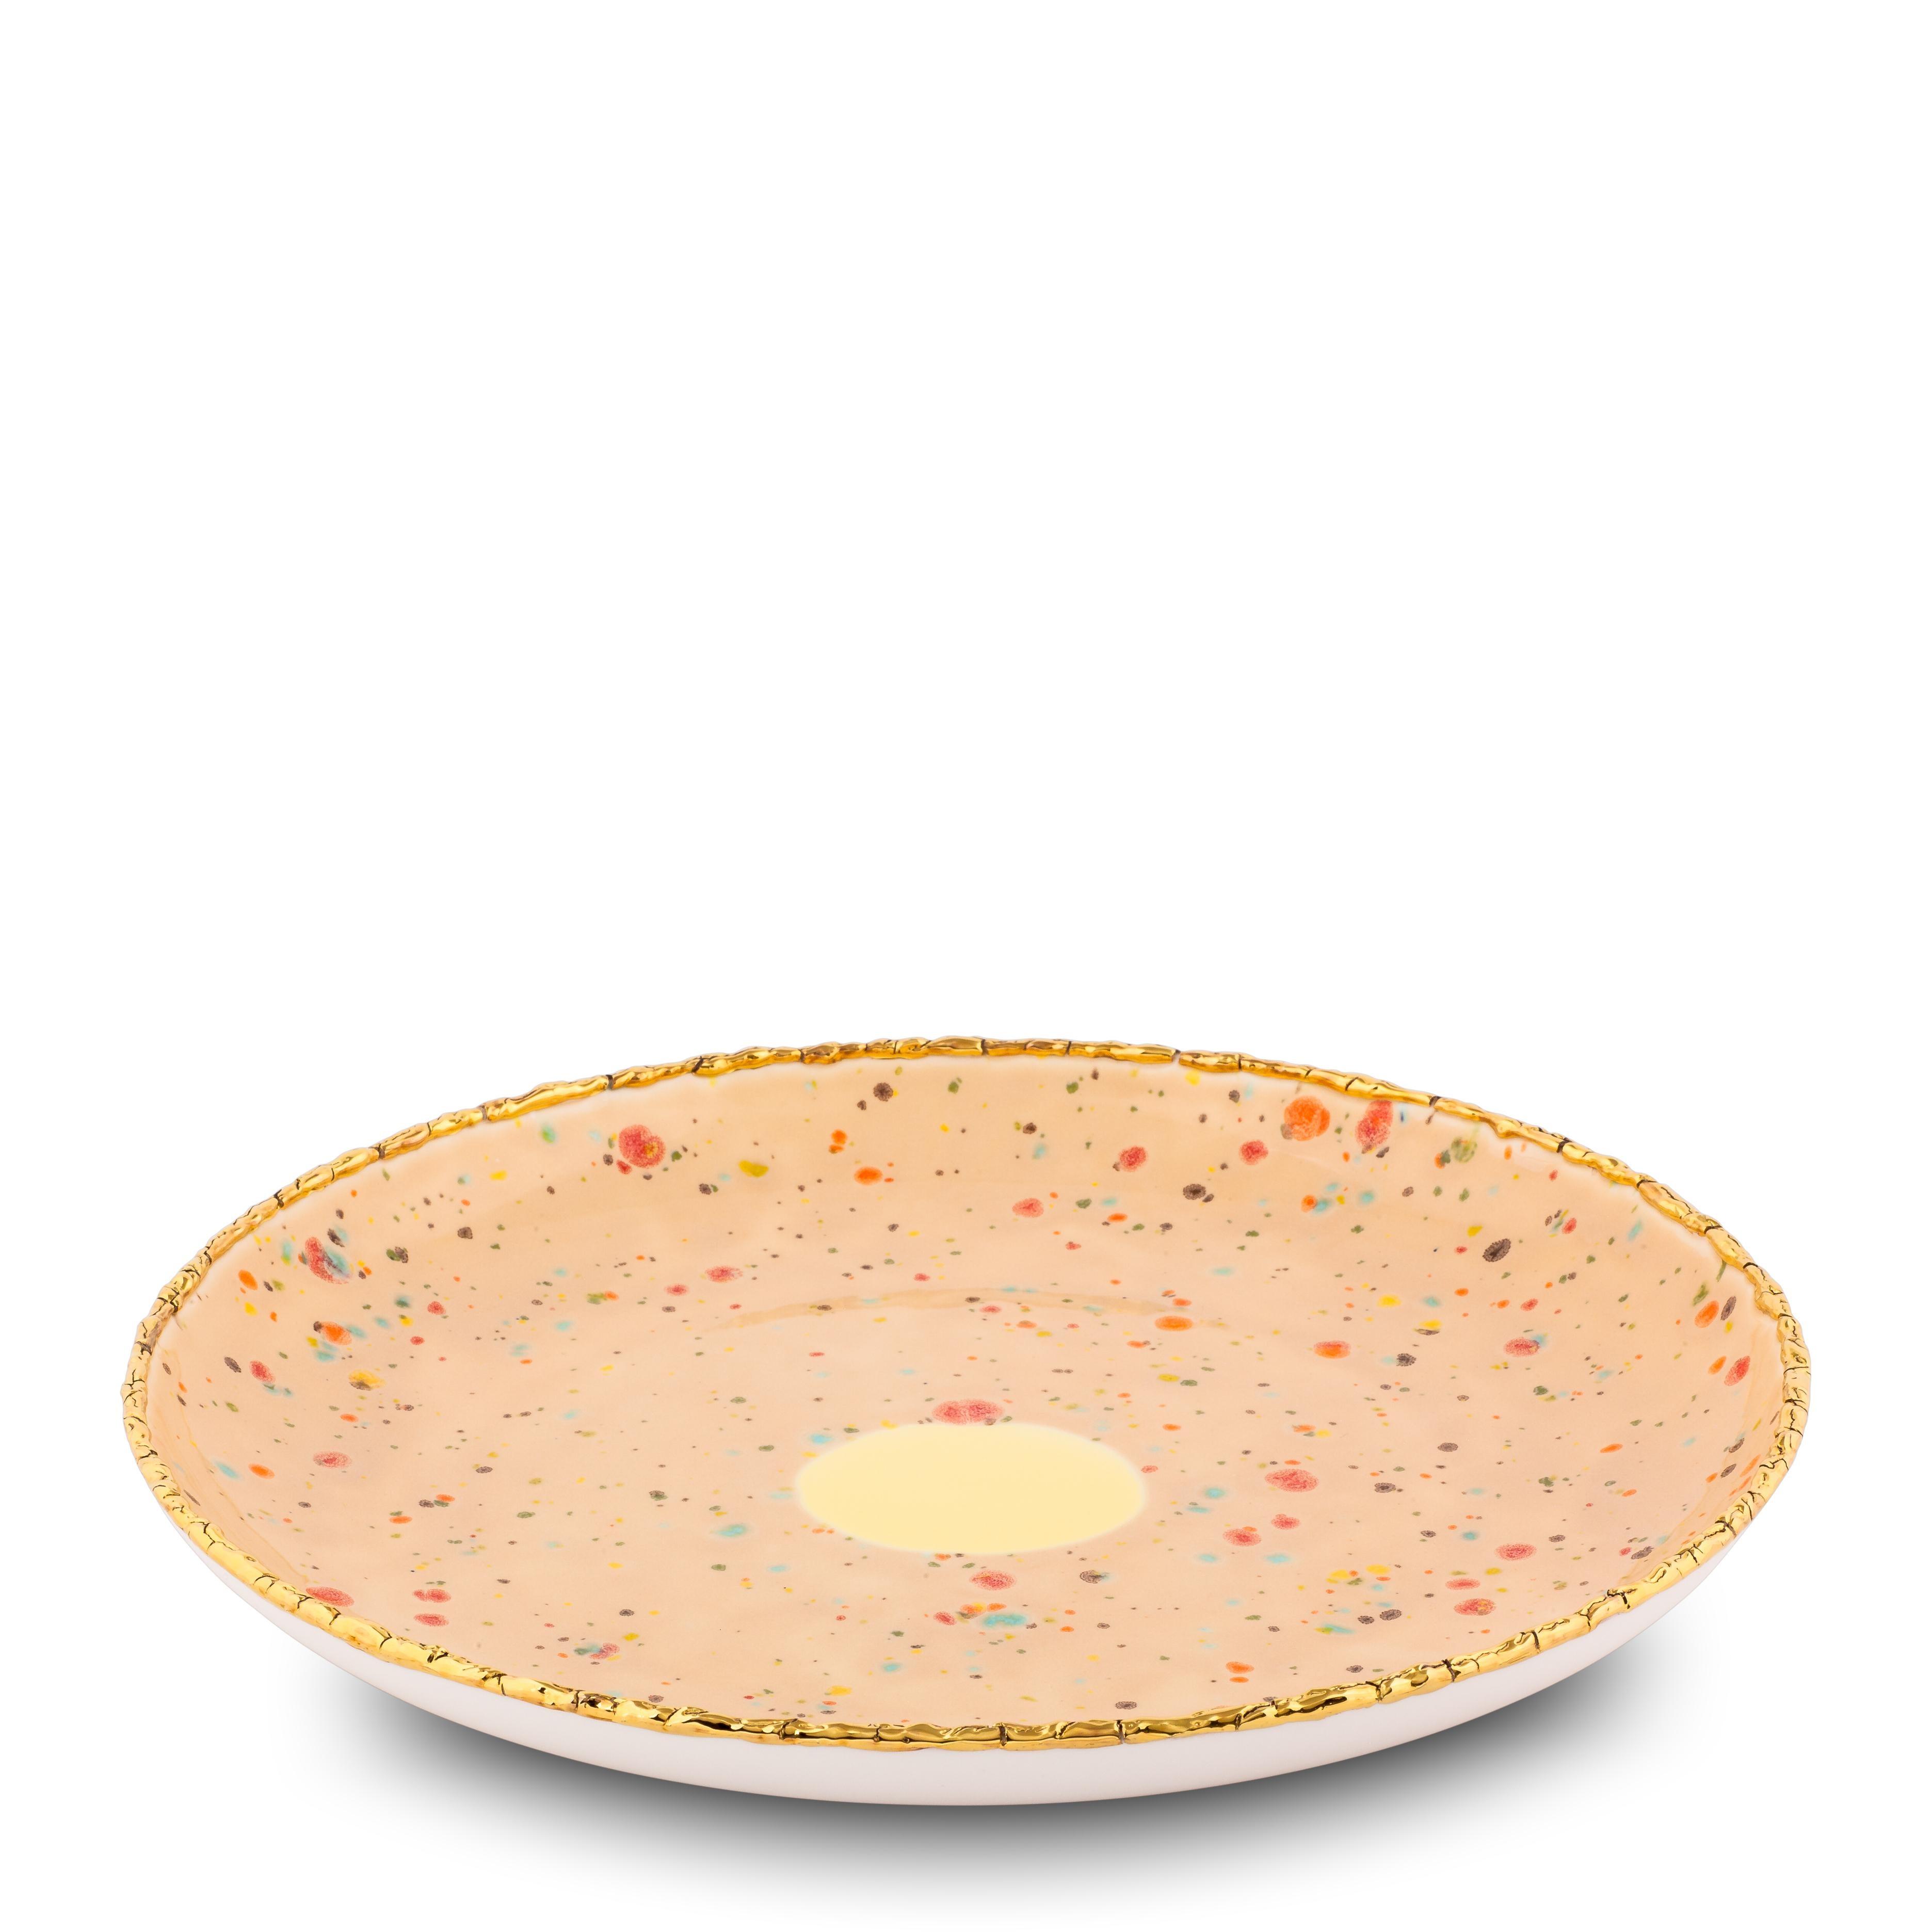 Hand painted in Italy from the finest porcelain, this craquelé edge coupe platter from the Chestnut collection has an original golden crackled rim emphasizing the sandy surface covered with little multicolor dots and the yellow decoration at the